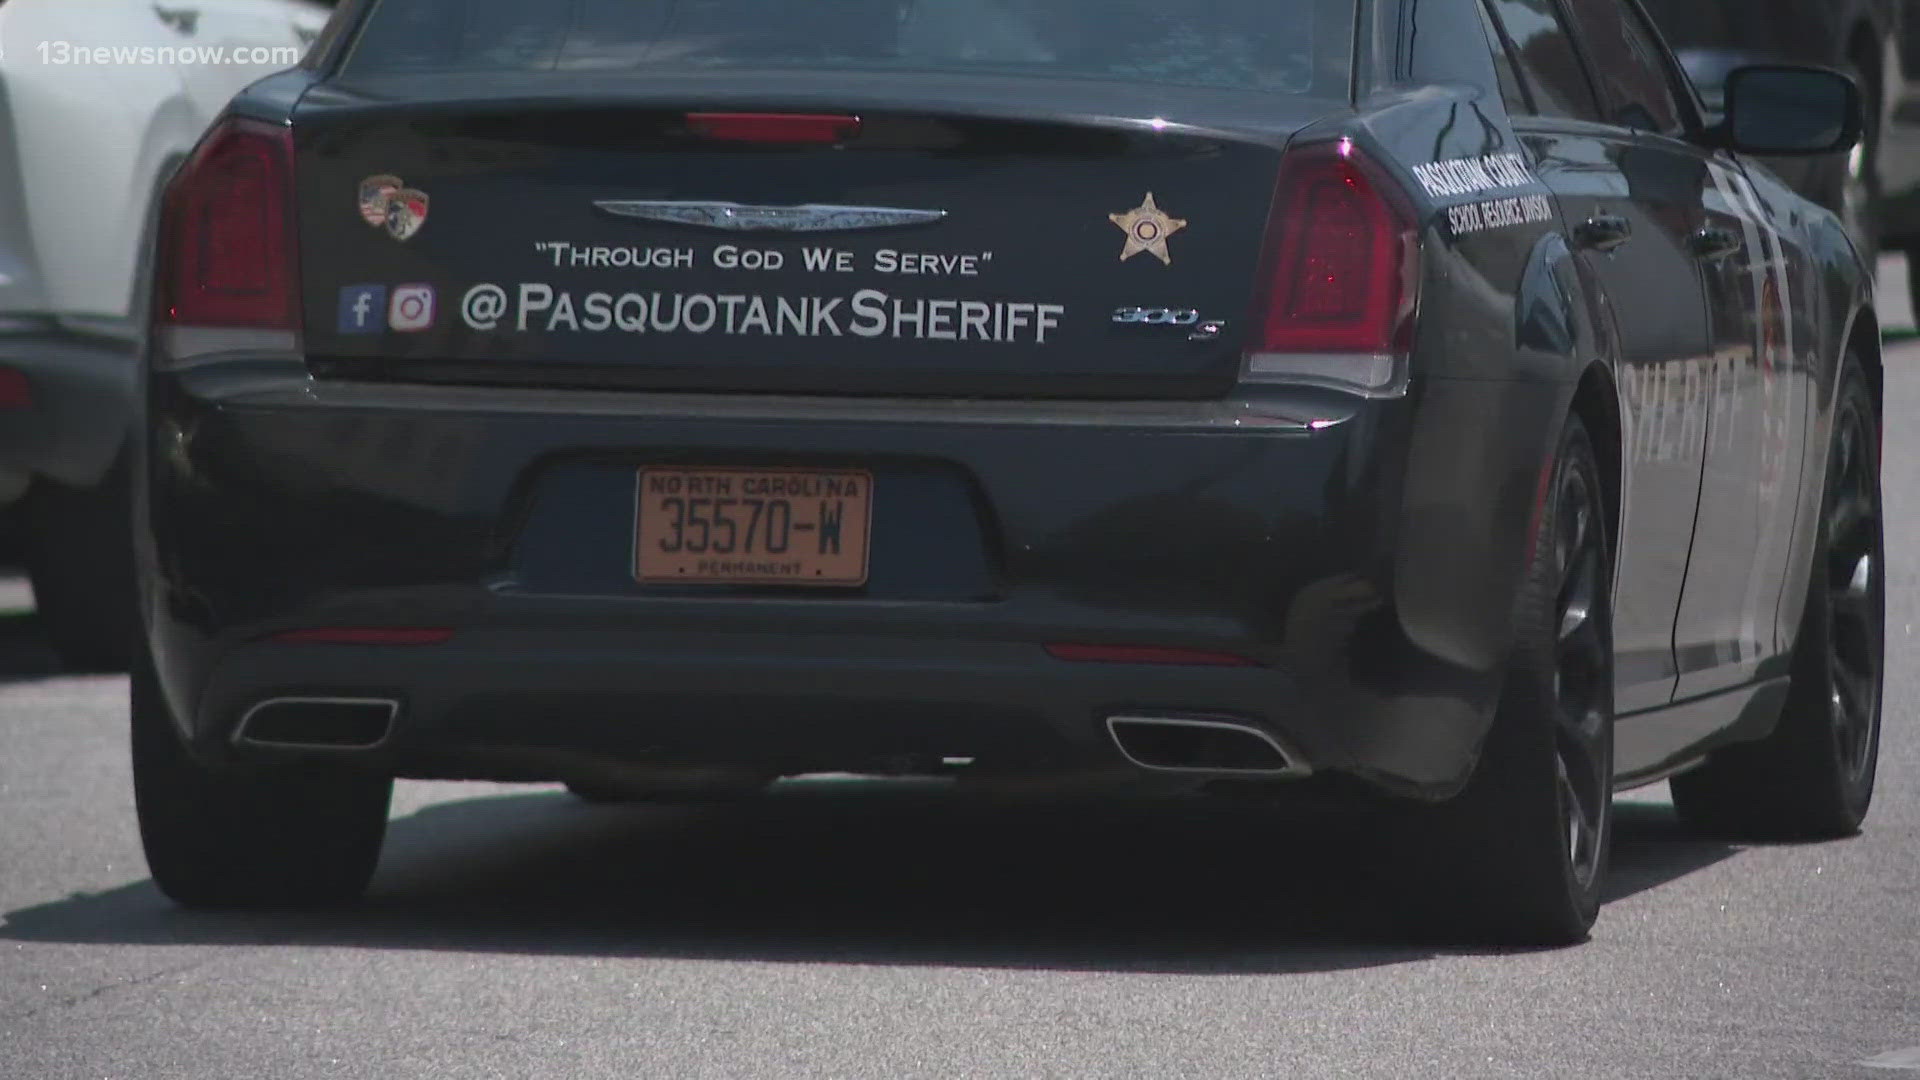 The Pasquotank Sheriff's Office has added more patrols inside Elizabeth City after complaints of increased crime.